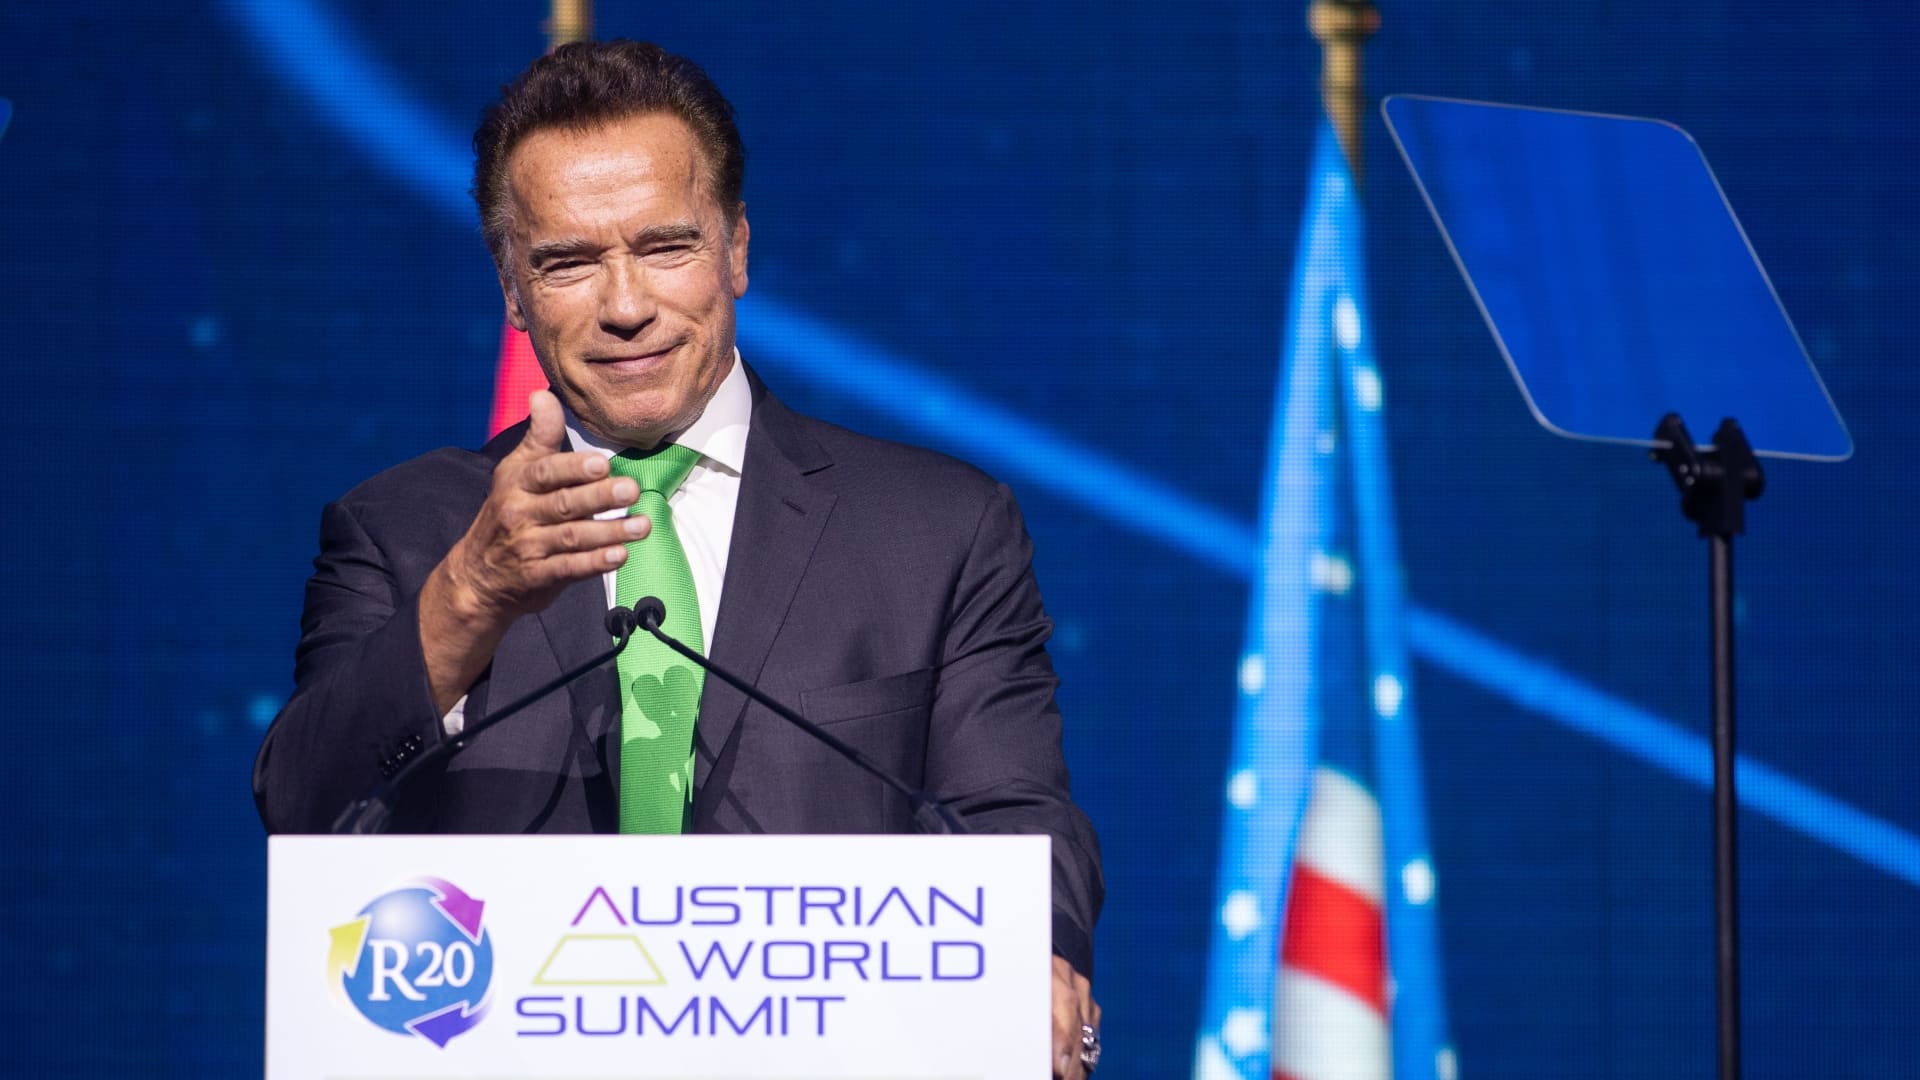 Arnold Schwarzenegger: “Nobody gives a shit” about climate change – that’s what it should be called instead